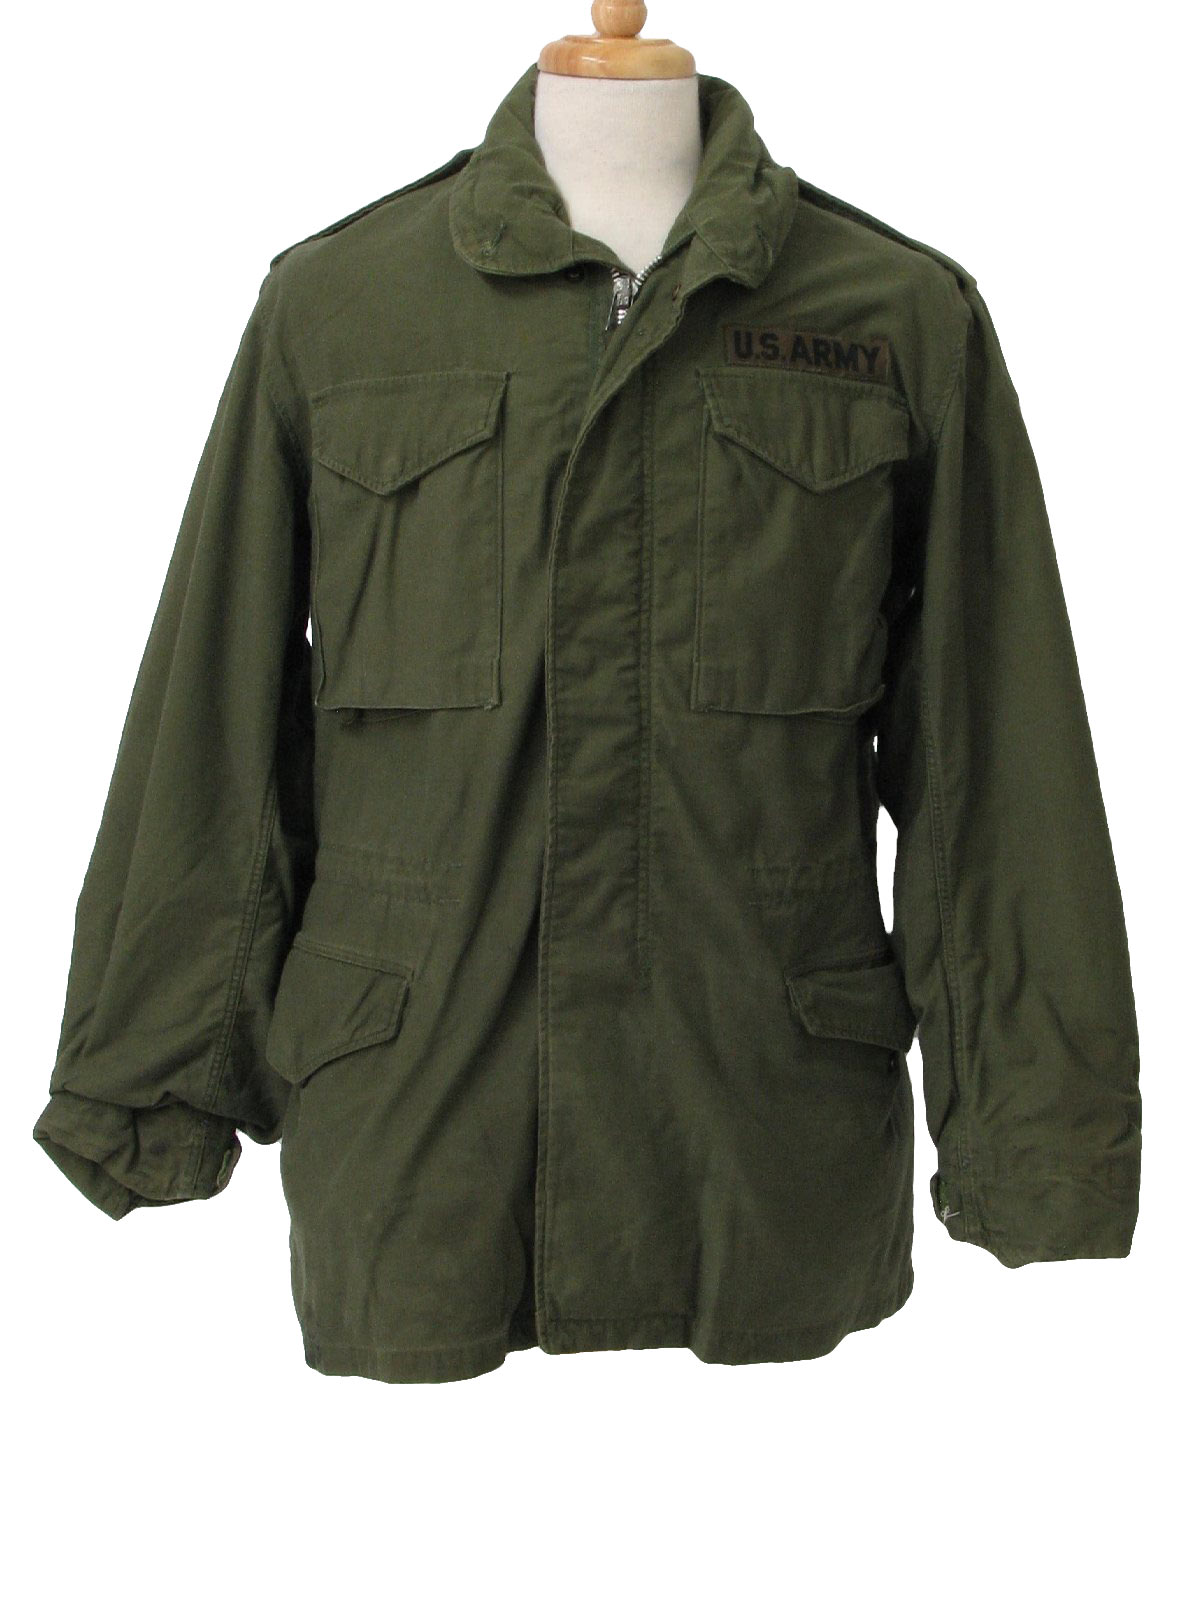 Army Jacket Green - Jacket To